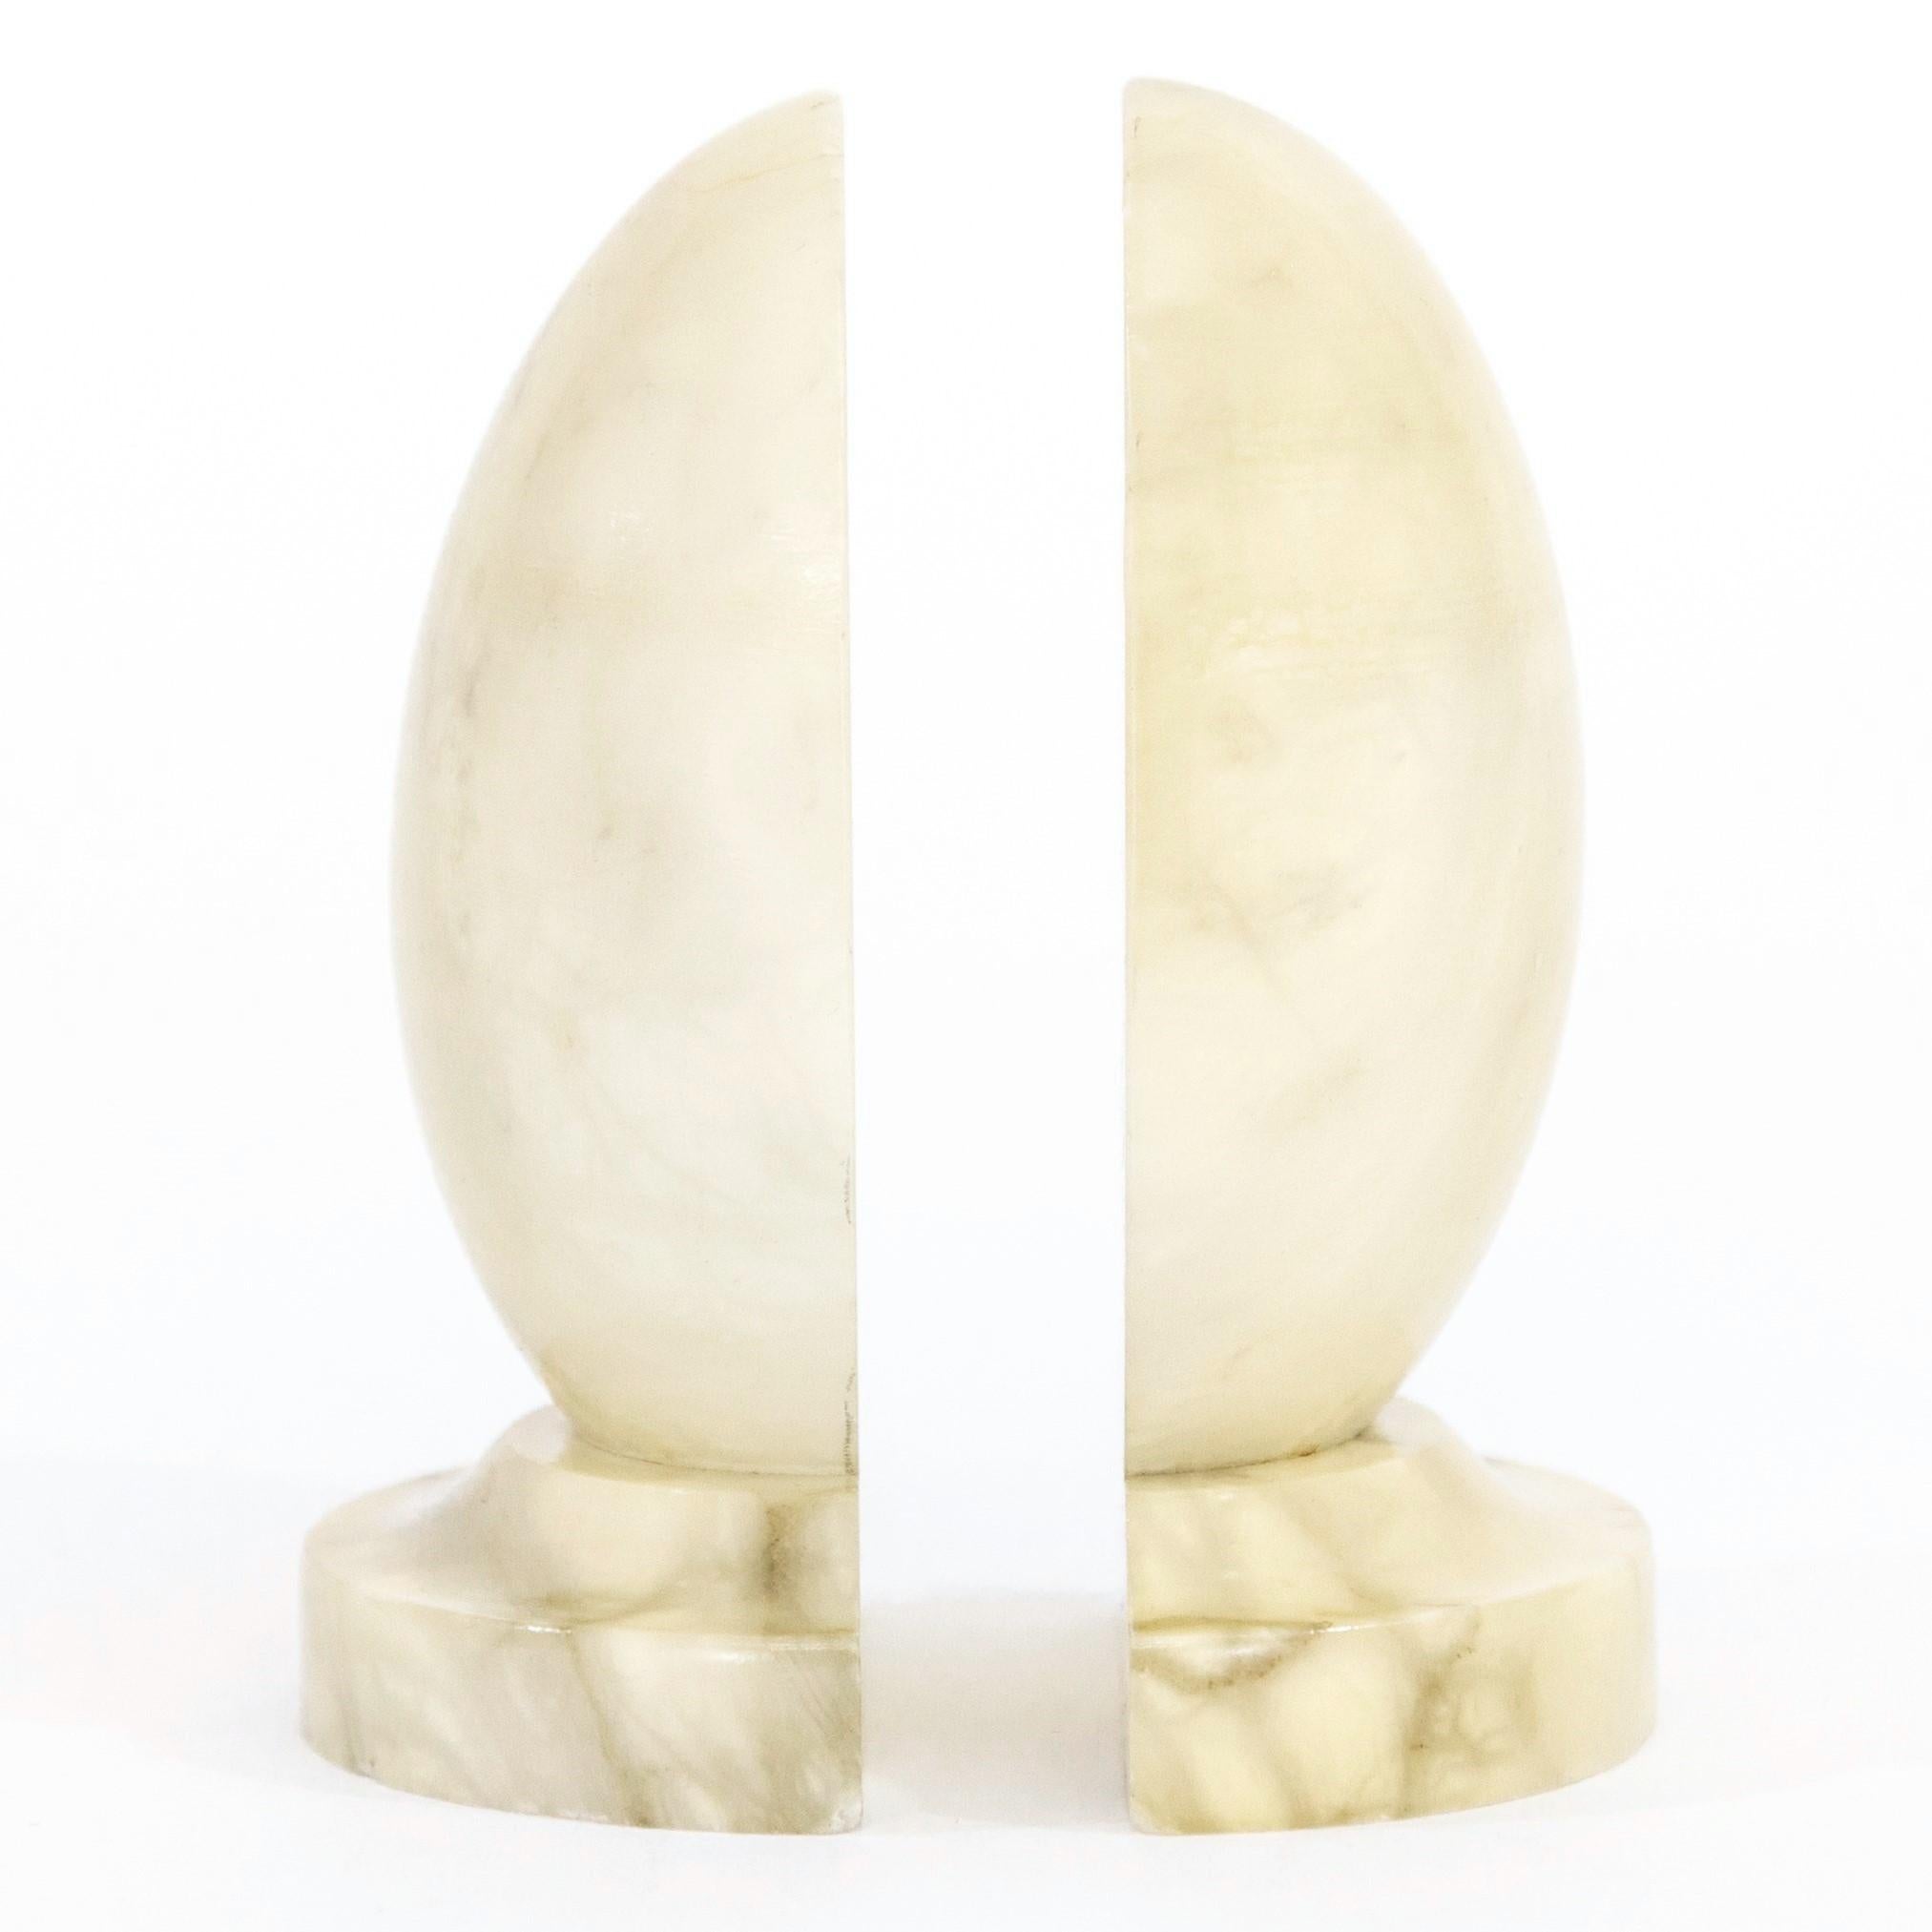 A pair of vintage Italian polished alabaster egg-form bookends, circa 1960s. The natural off-white stone has darkened from age and has gray and tan marbled veining. Each measures 3 7/8